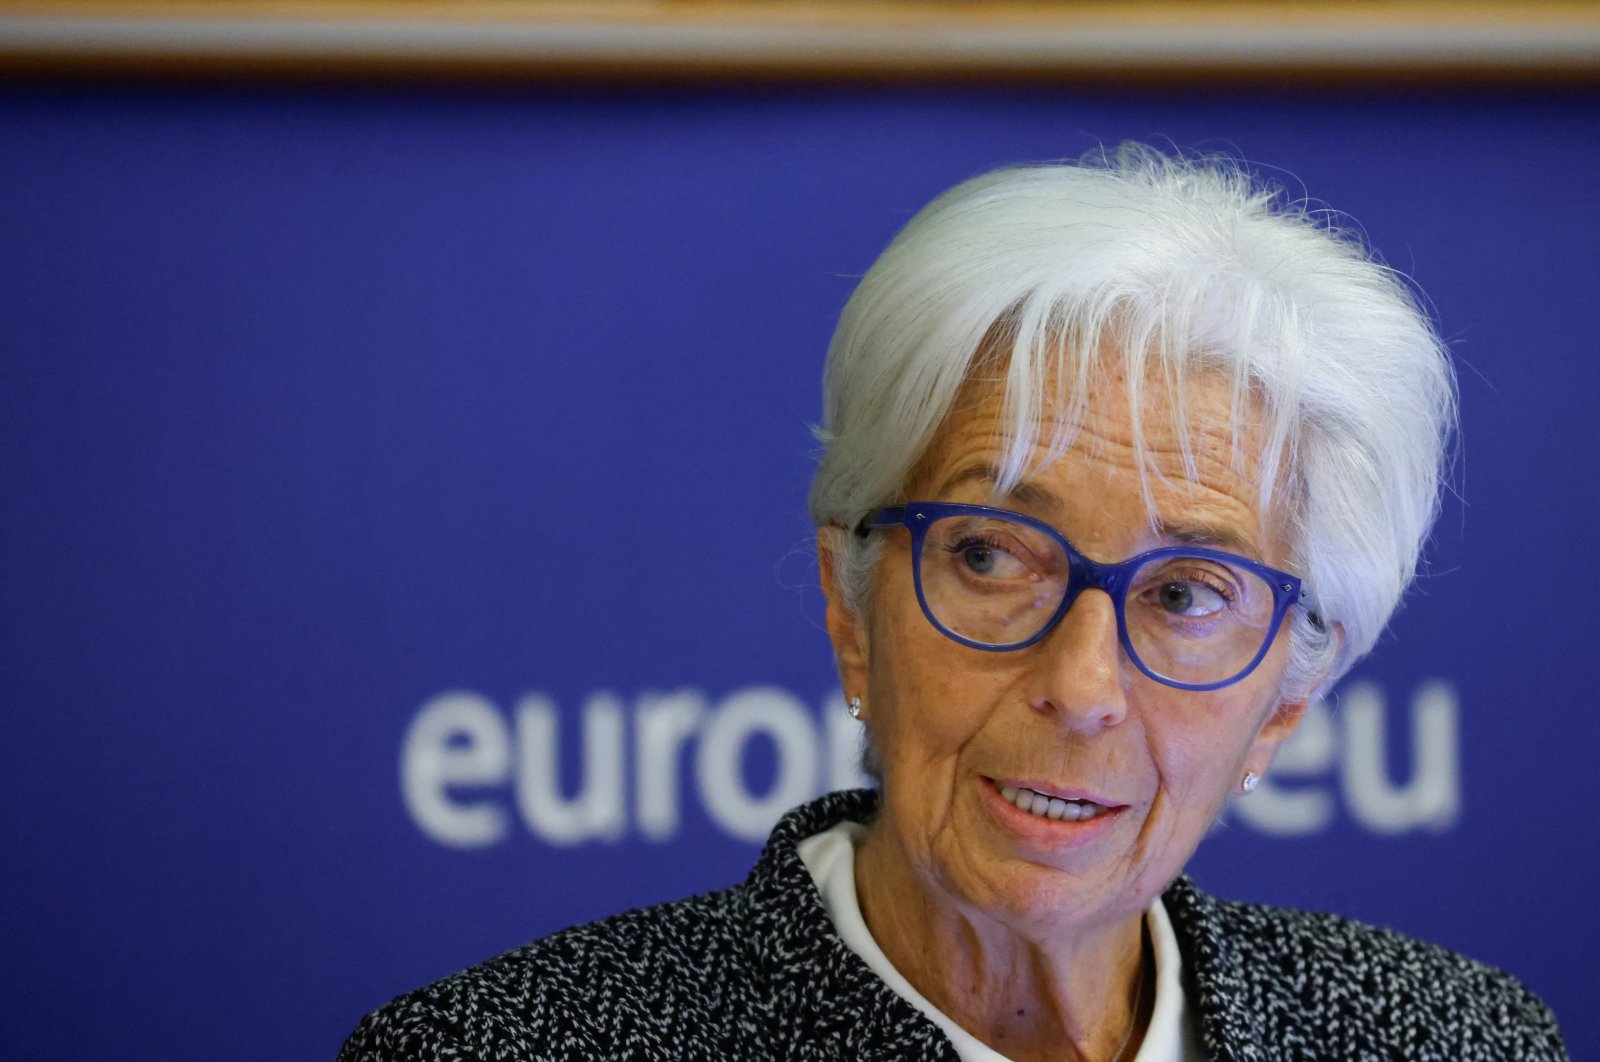 President of European Central Bank (ECB) Christine Lagarde testifies before the Committee on Economic and Monetary Affairs (ECON), of the European Parliament, in Brussels, Belgium, Nov. 28, 2022. (Reuters Photo)